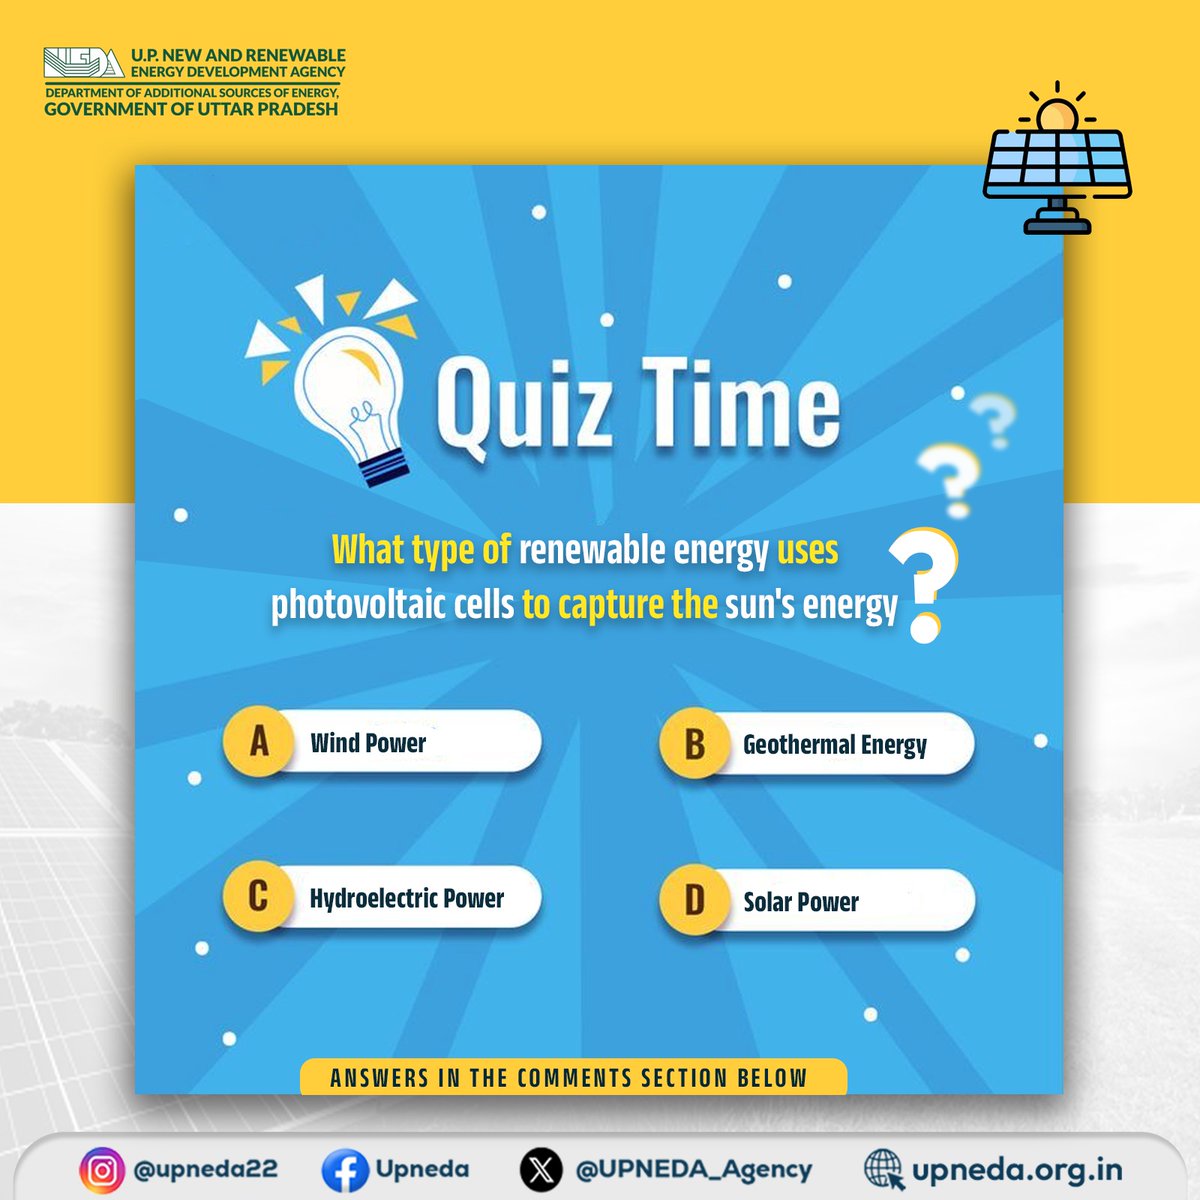 Quiz Time! 

What type of Renewable Energy uses photovoltaic cells to capture the sun's energy? Drop your answers in the comments below! 

#SolarEnergy
#RenewableEnergy #SolarPower 
#QuizTime #UPNEDA